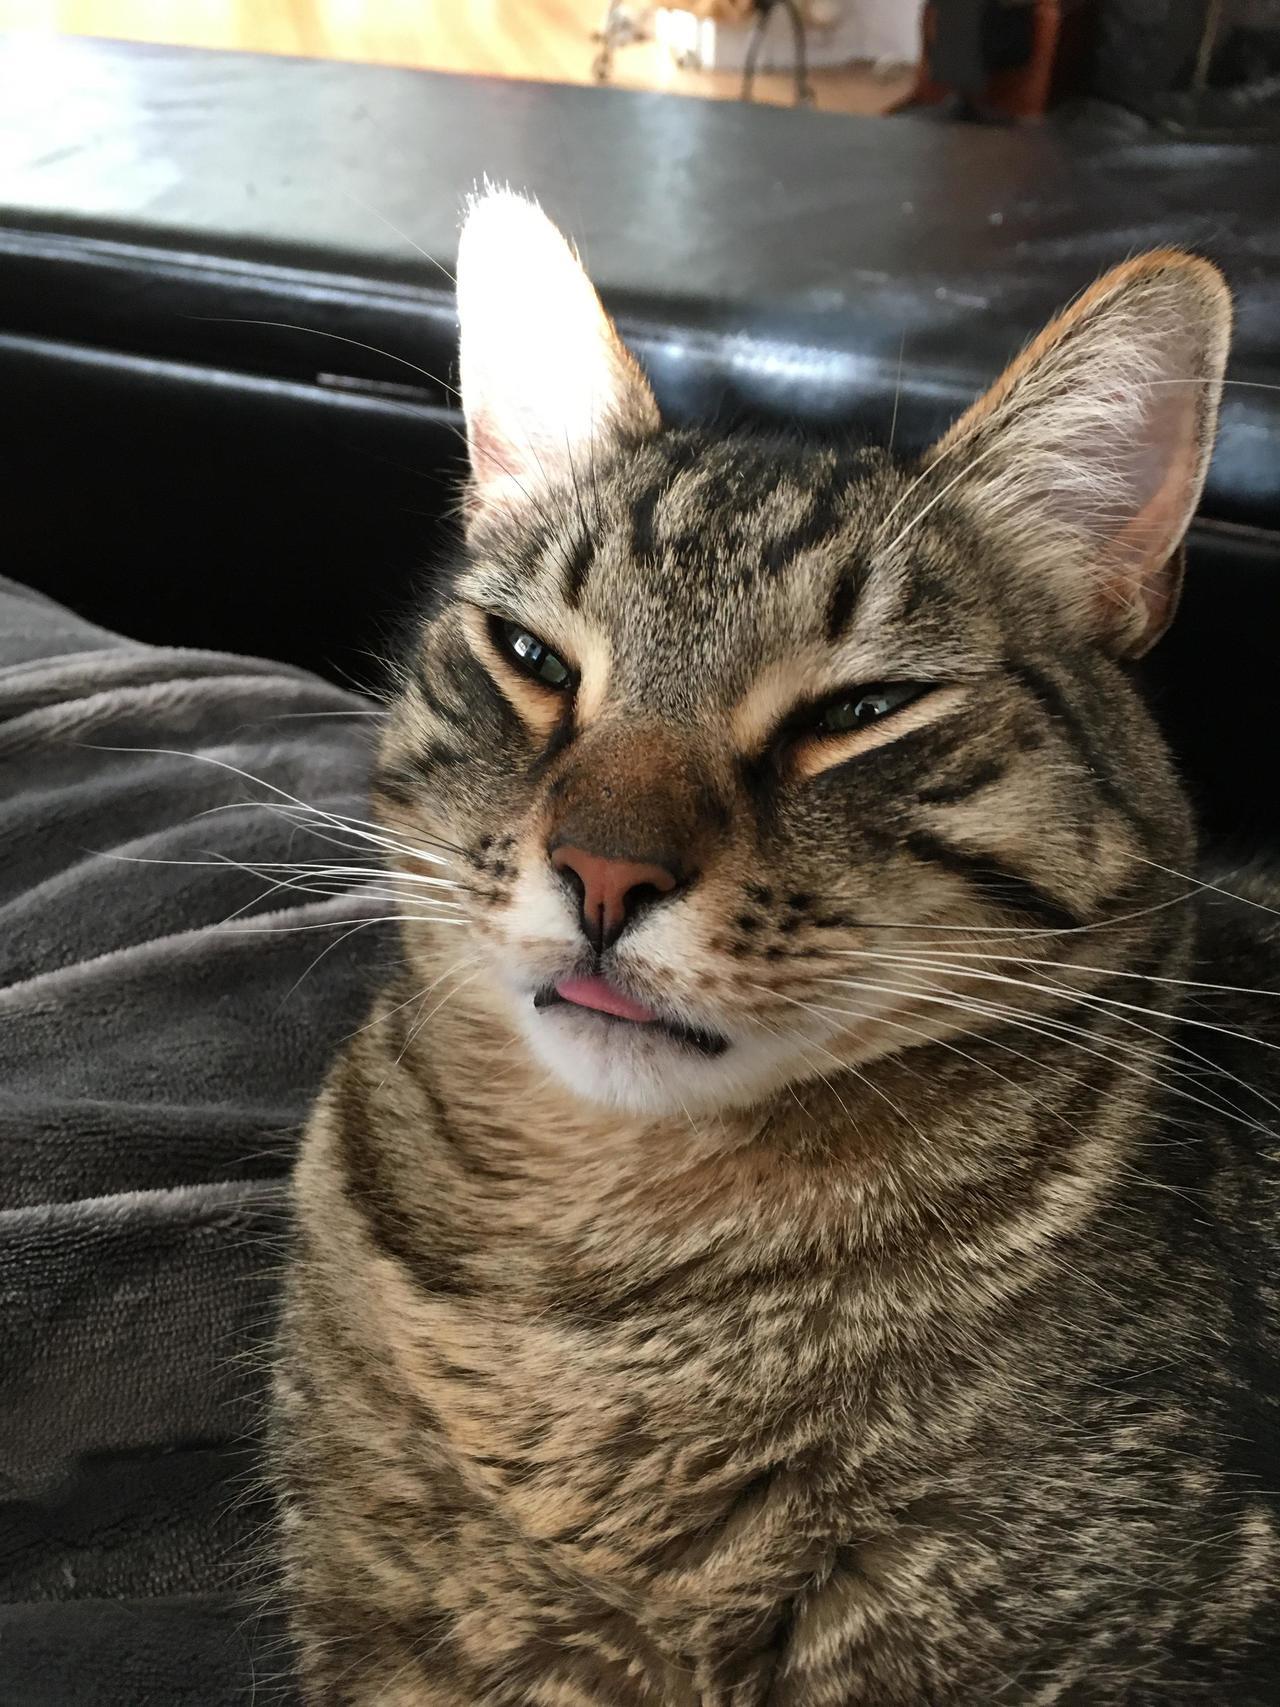 Daily Blep — The rare Siberian tiger was caught blepping on...